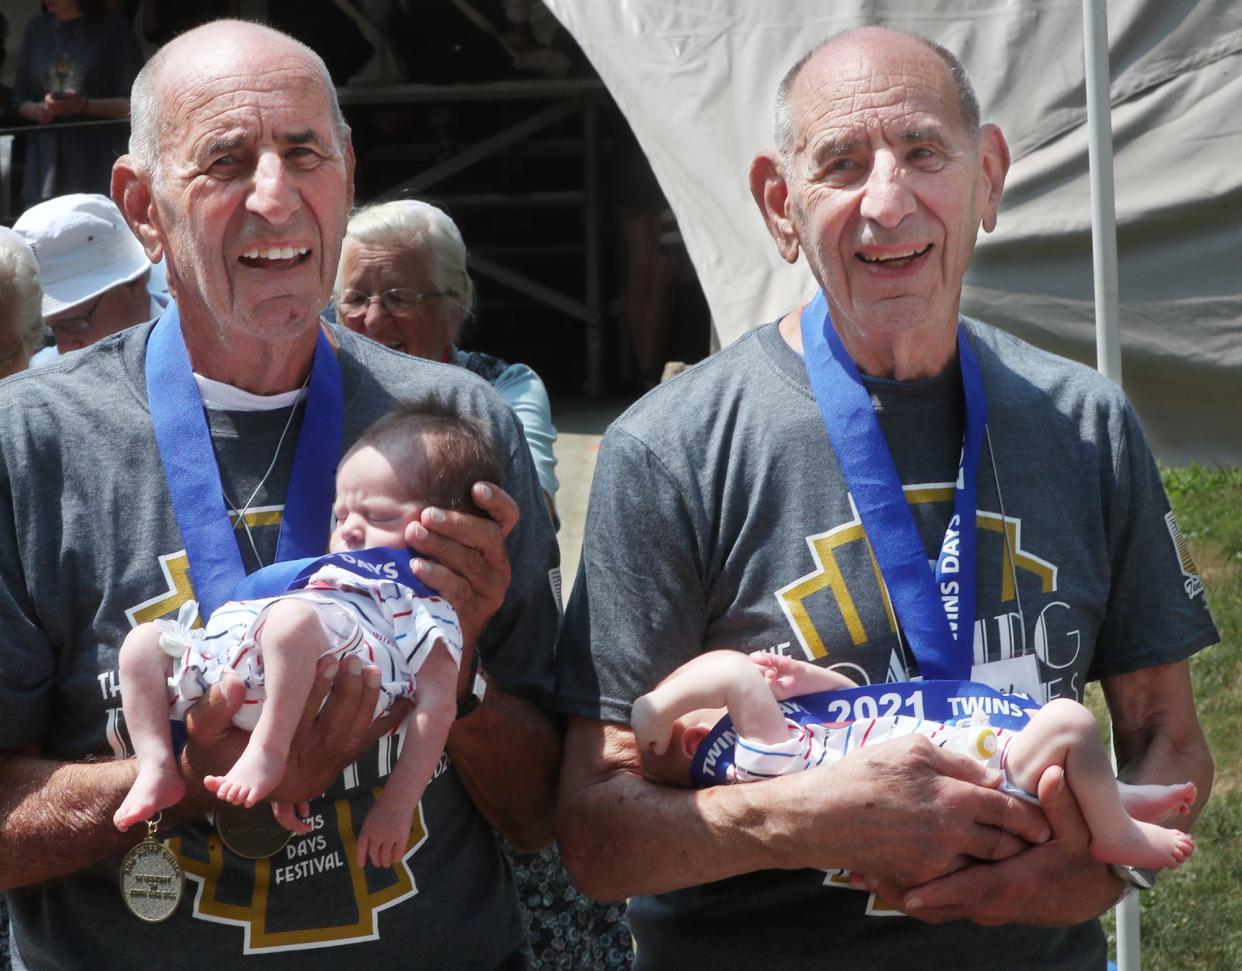 The oldest twins Selig and Irwin Lurie, 90, hold the youngest twins, 11 days old, Ryan and Owen Dean, from Medina, at the 46th Annual Twins Day Festival on Saturday Aug. 7, 2021 in Twinsburg.